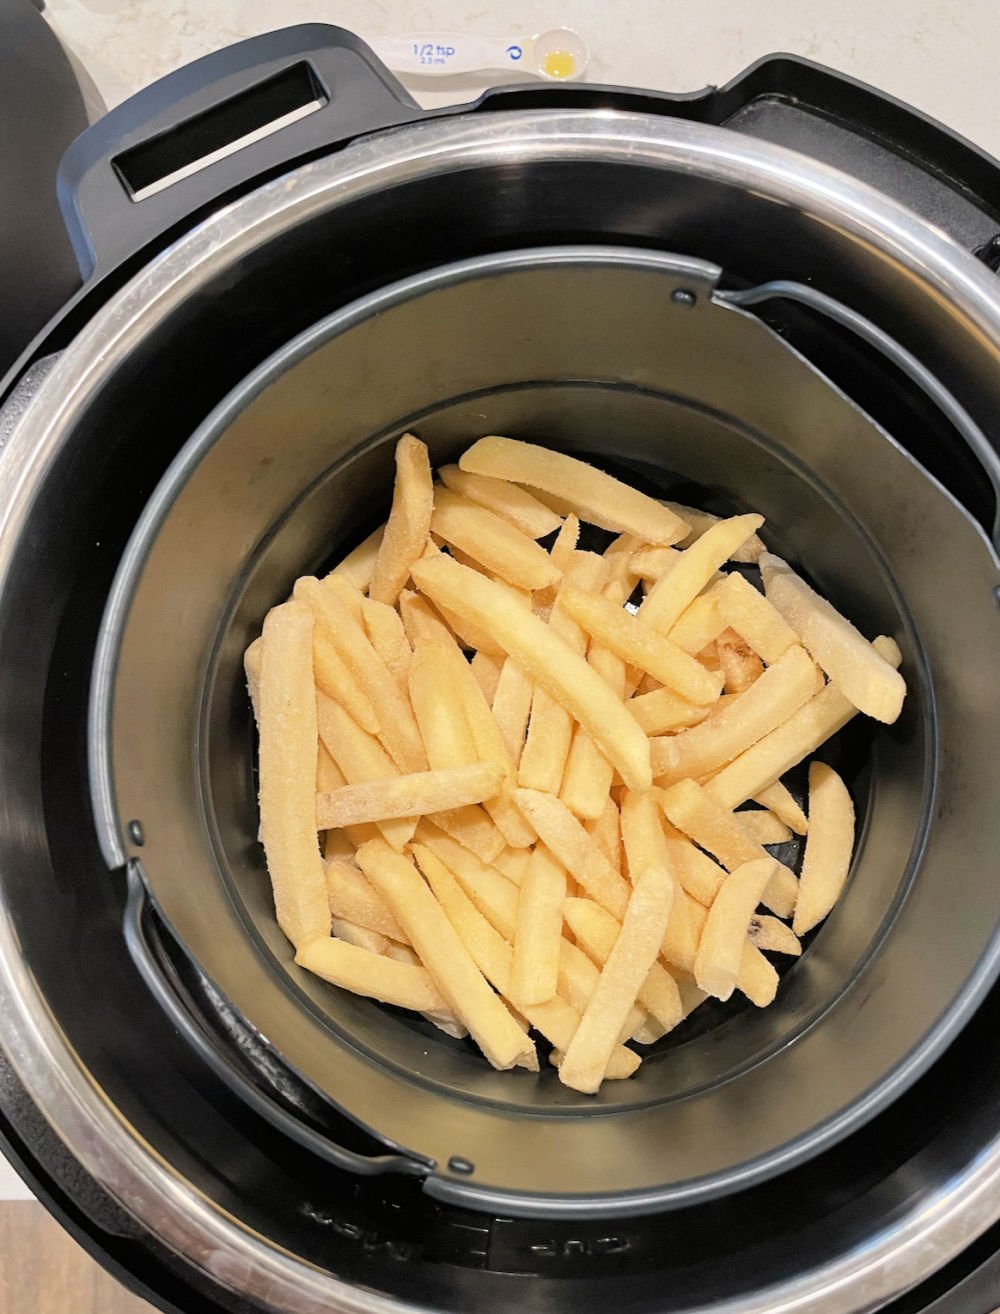 frozen french fries in the bottom of the air fryer